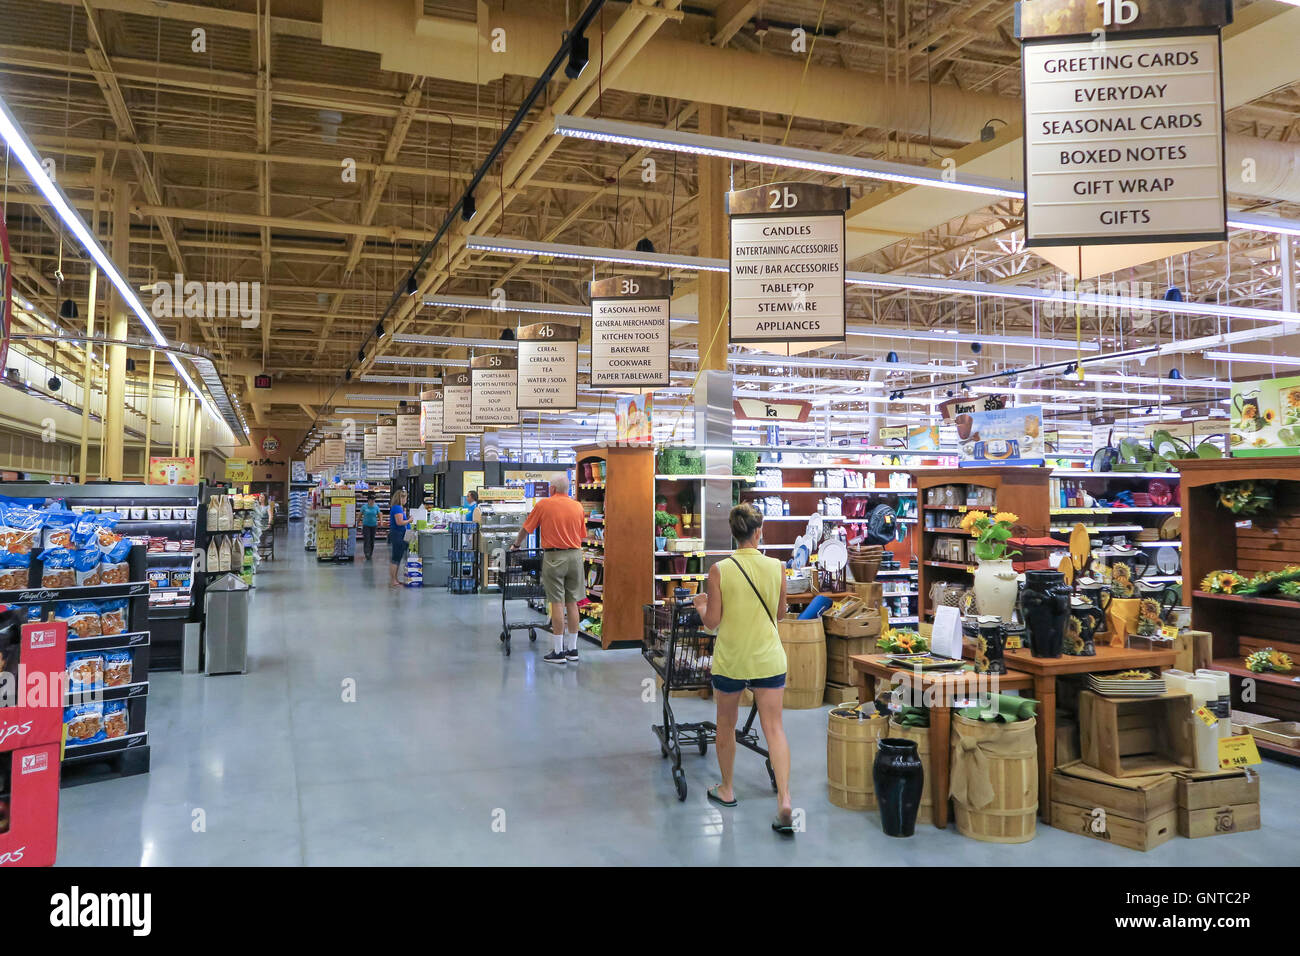 Overview of Store Interior with Aisle Signs, Wegmans Grocery Store, Westwood, Massachusetts, USA Stock Photo